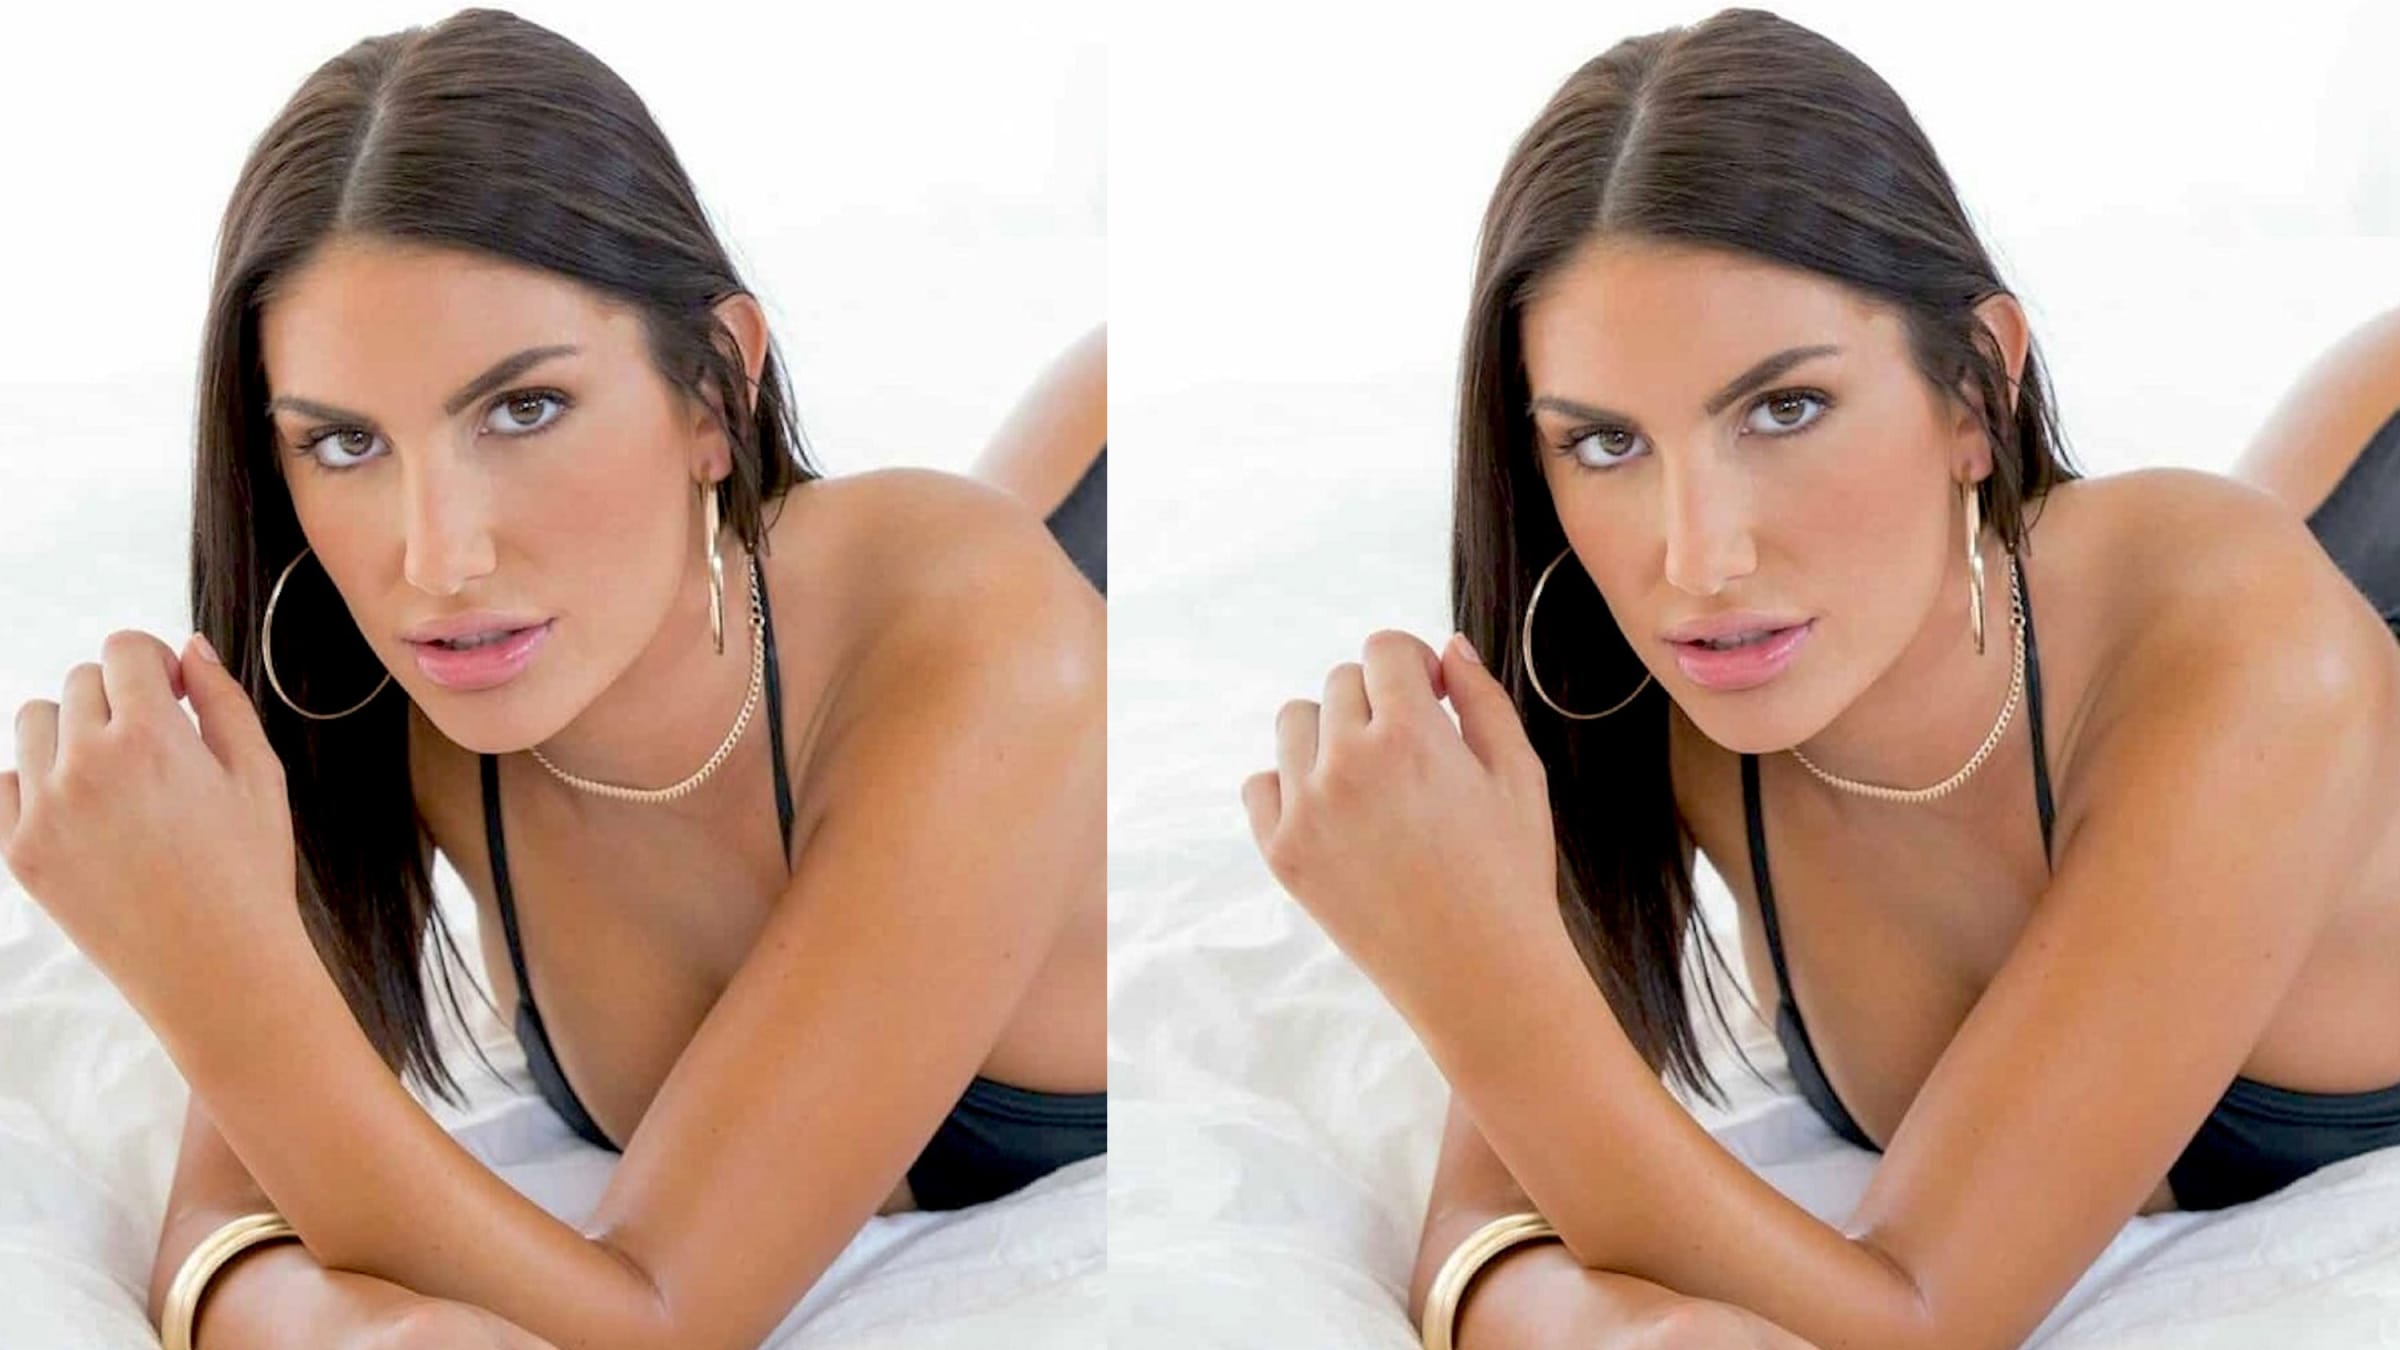 American Mom Rape Son Sex Videos Free New - Mother of 'Cyberbullied' Porn Star August Ames Opens Up About Her Last Days